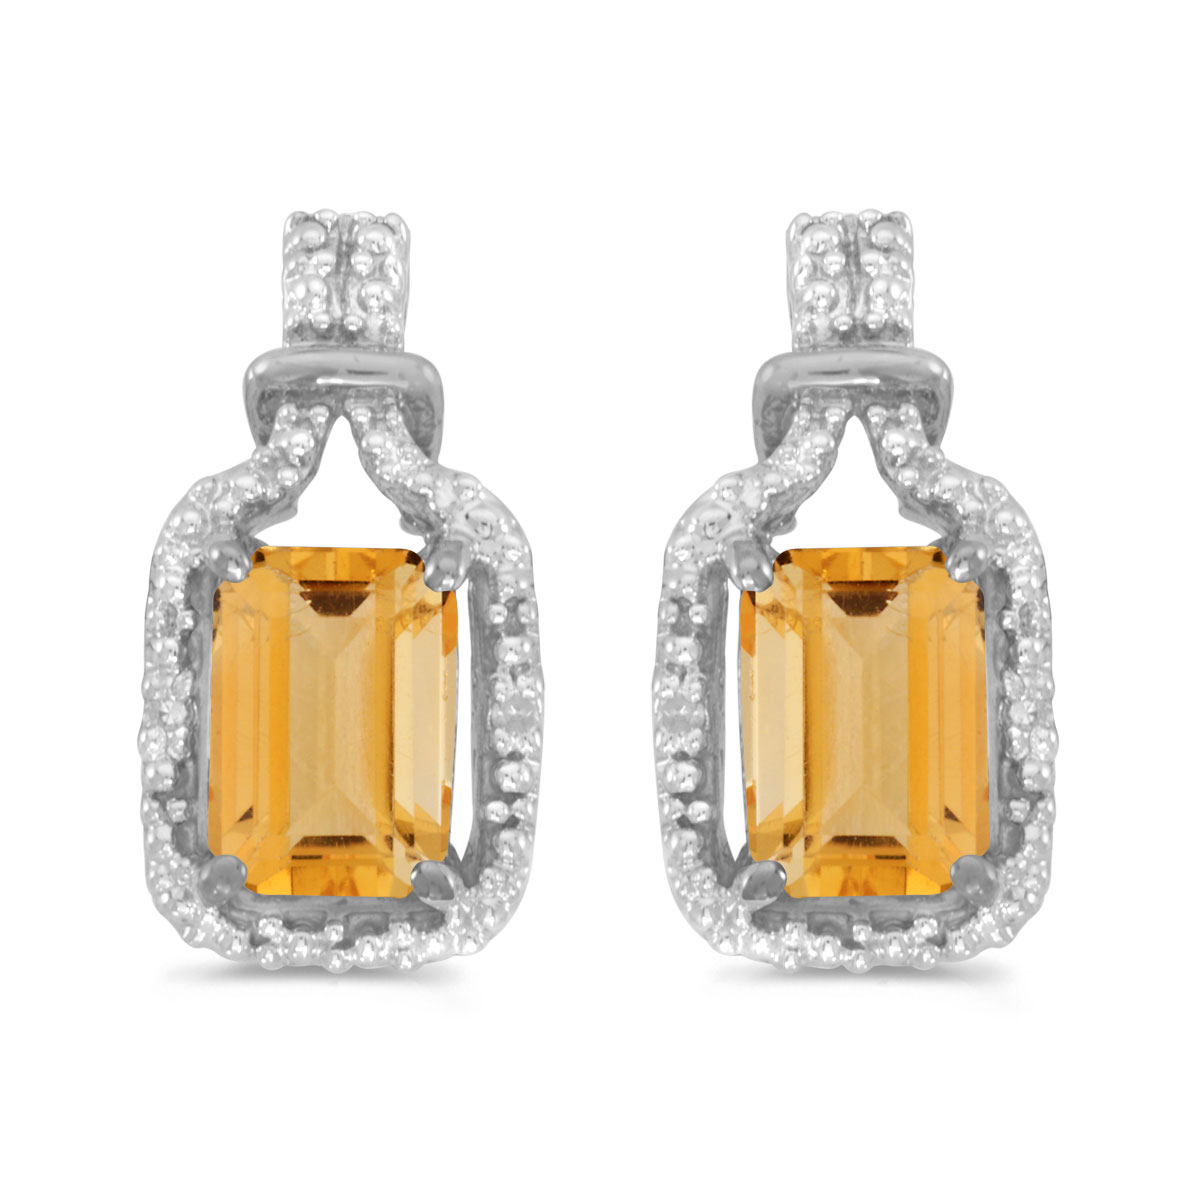 These 14k white gold emerald-cut citrine and diamond earrings feature 7x5 mm genuine natural citr...